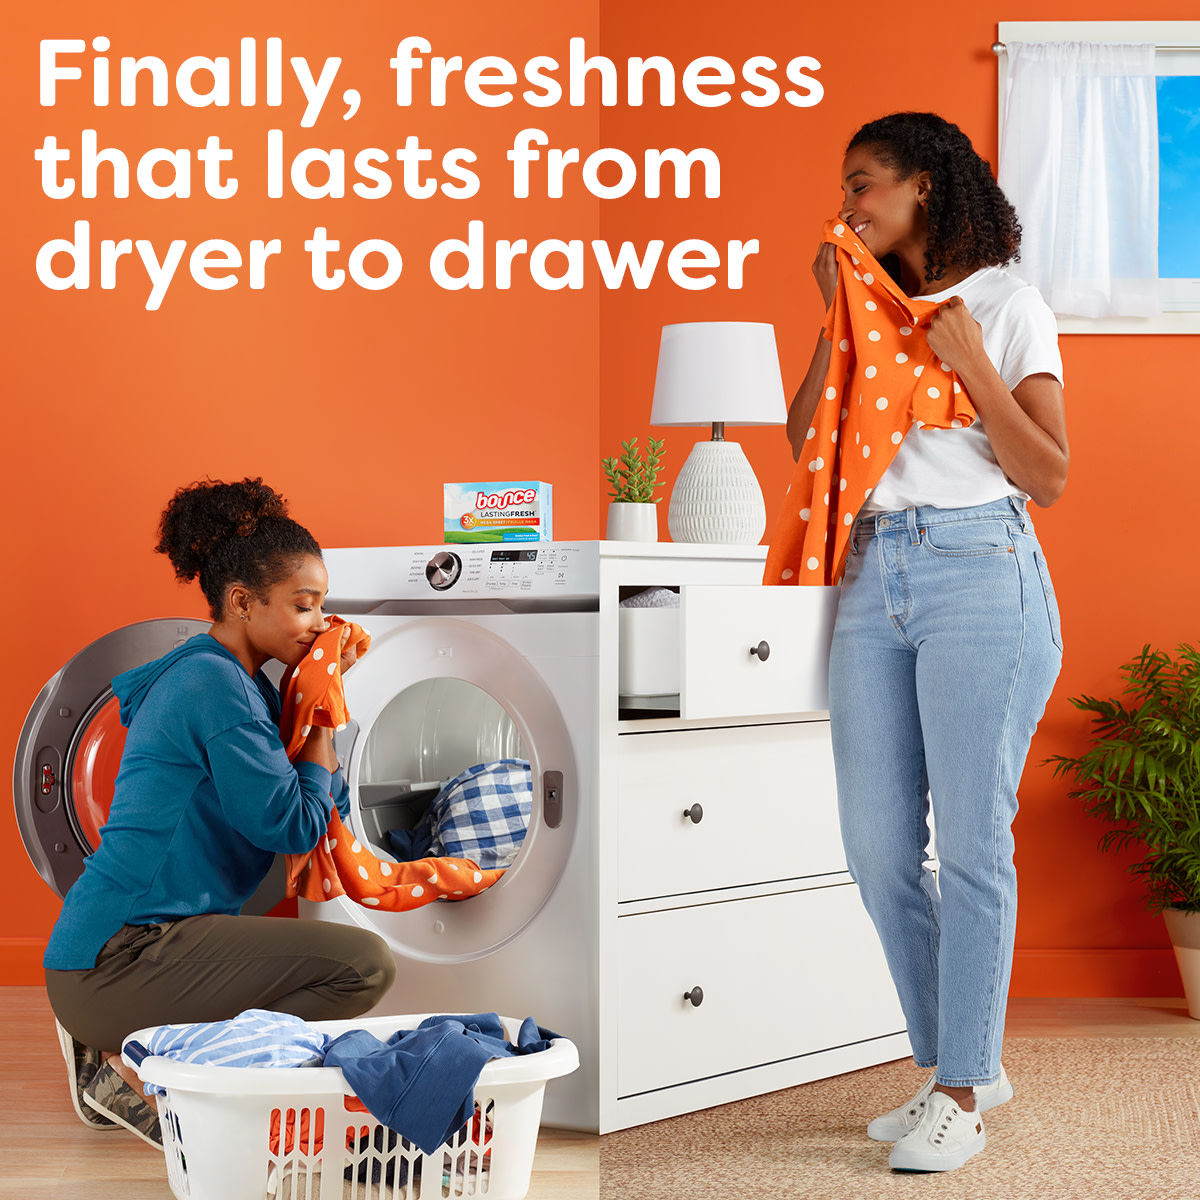 Bounce Lasting Fresh Dryer Sheets benefits: Freshness that lasts from dryer to drawer